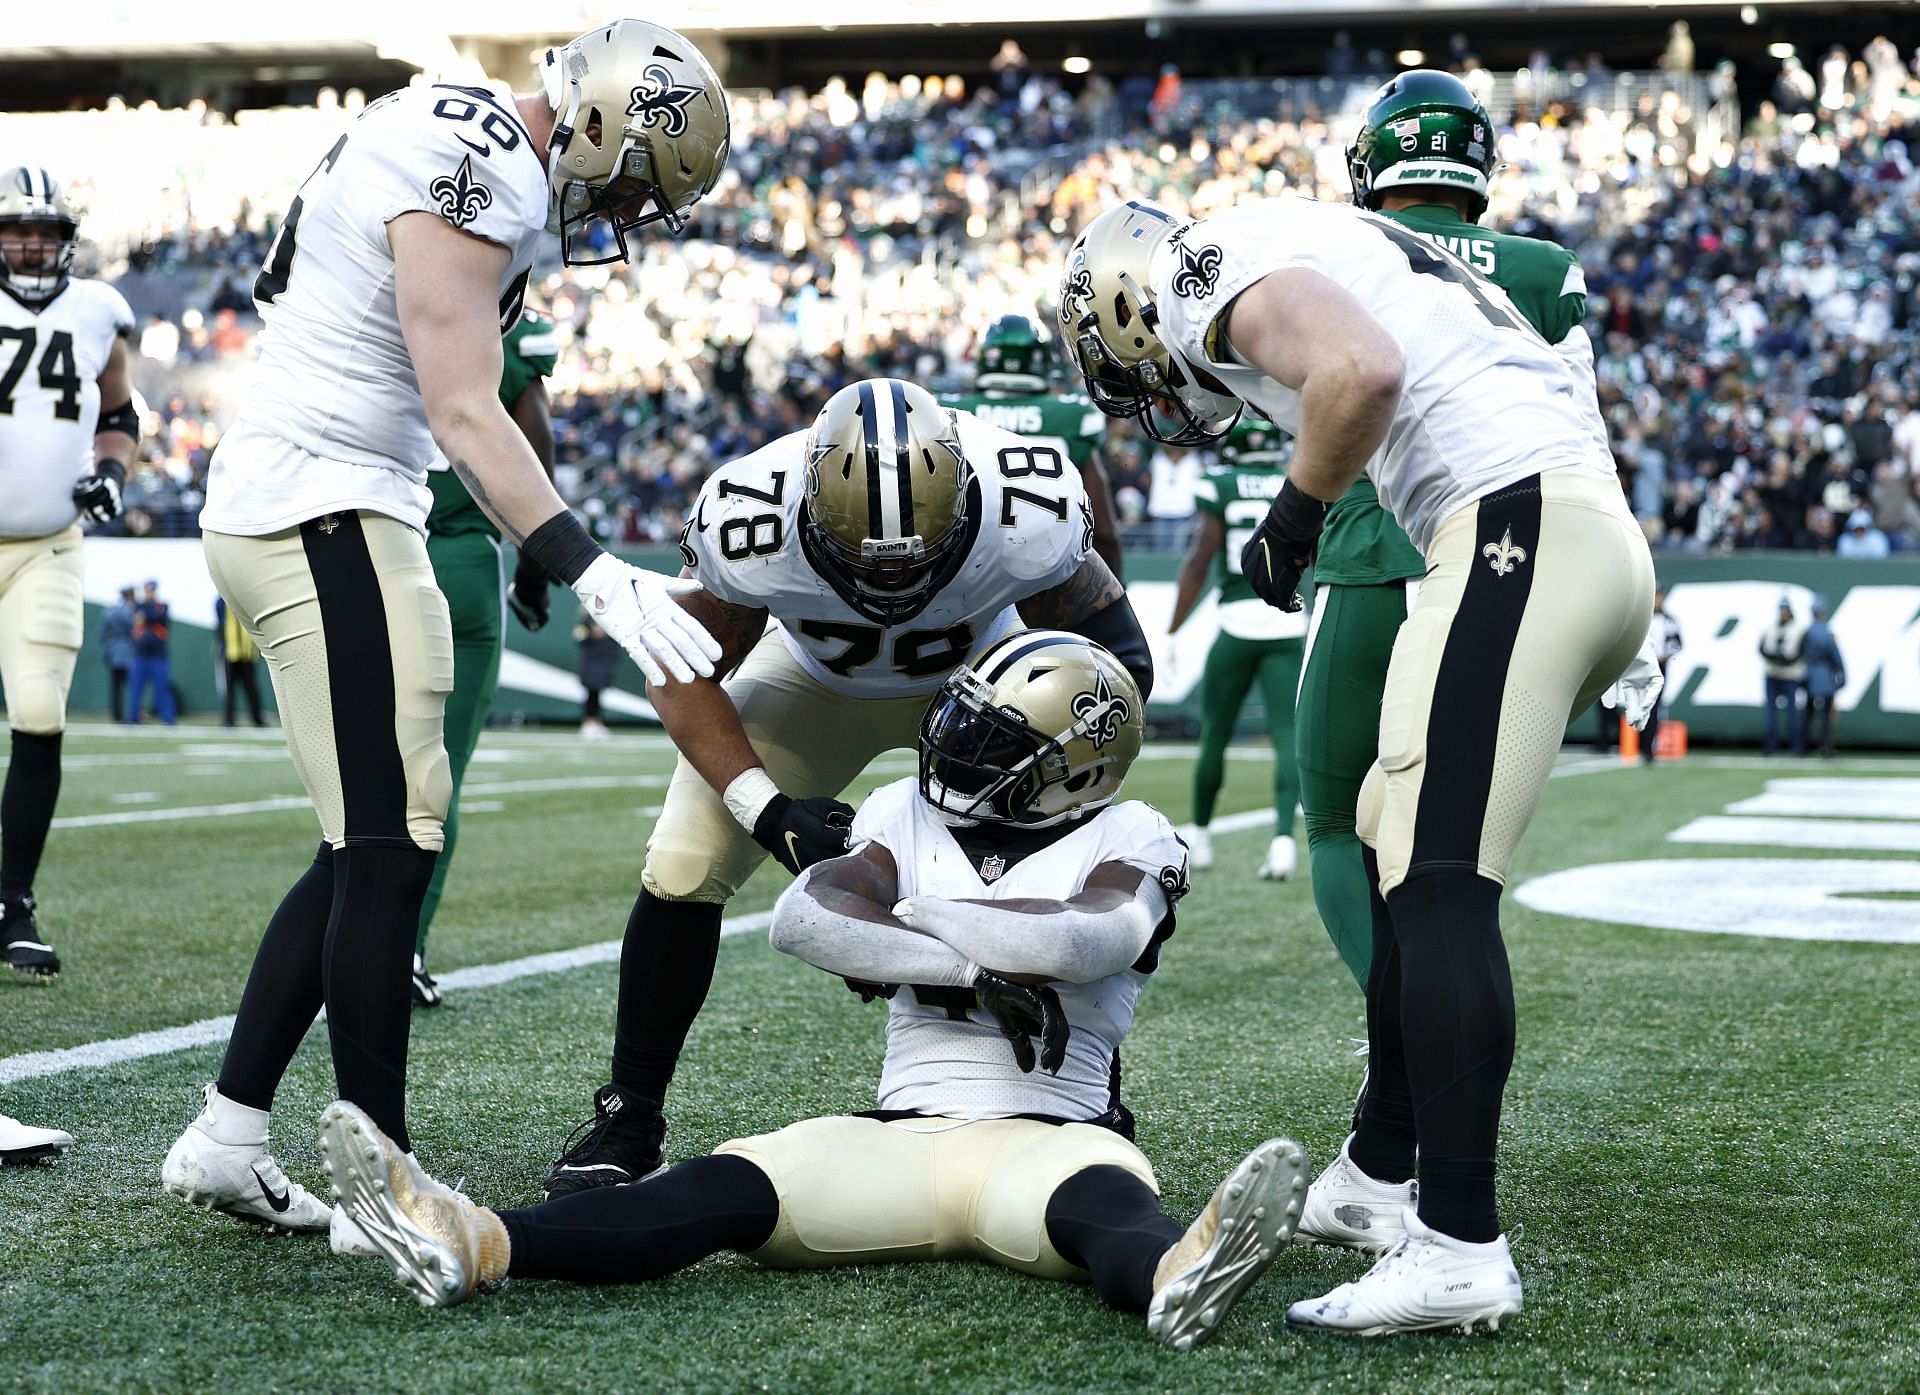 New Orleans Saints players celebrate in the endzone